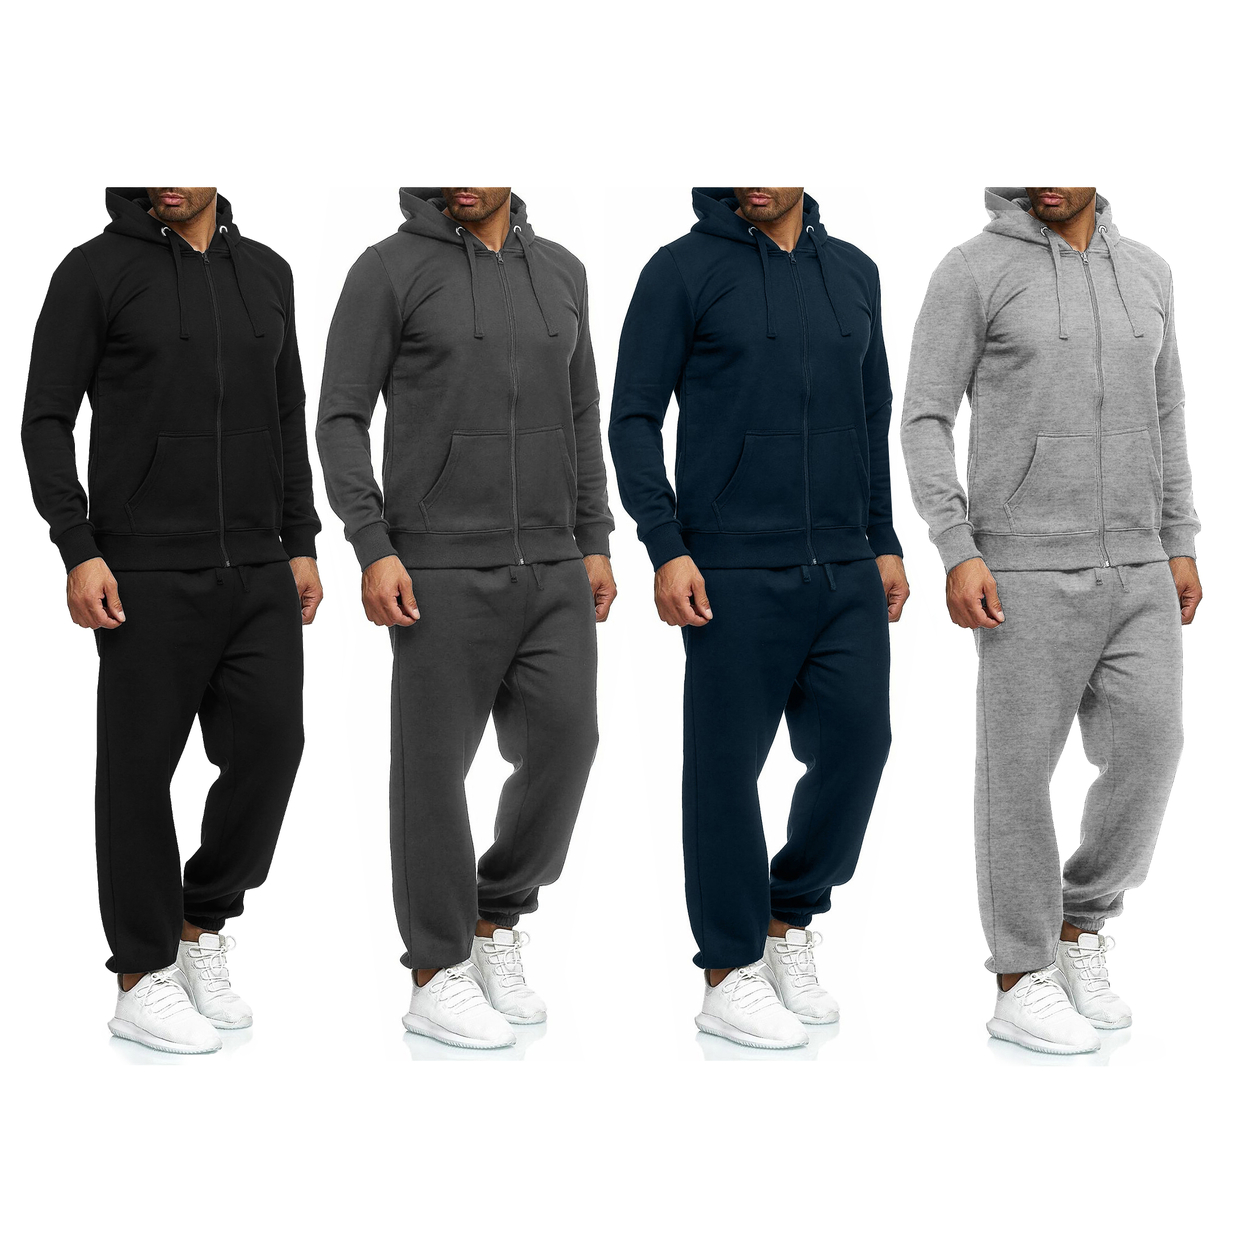 2-Pack: Men's Casual Big & Tall Athletic Active Winter Warm Fleece Lined Full Zip Tracksuit Jogger Set - Grey, Small